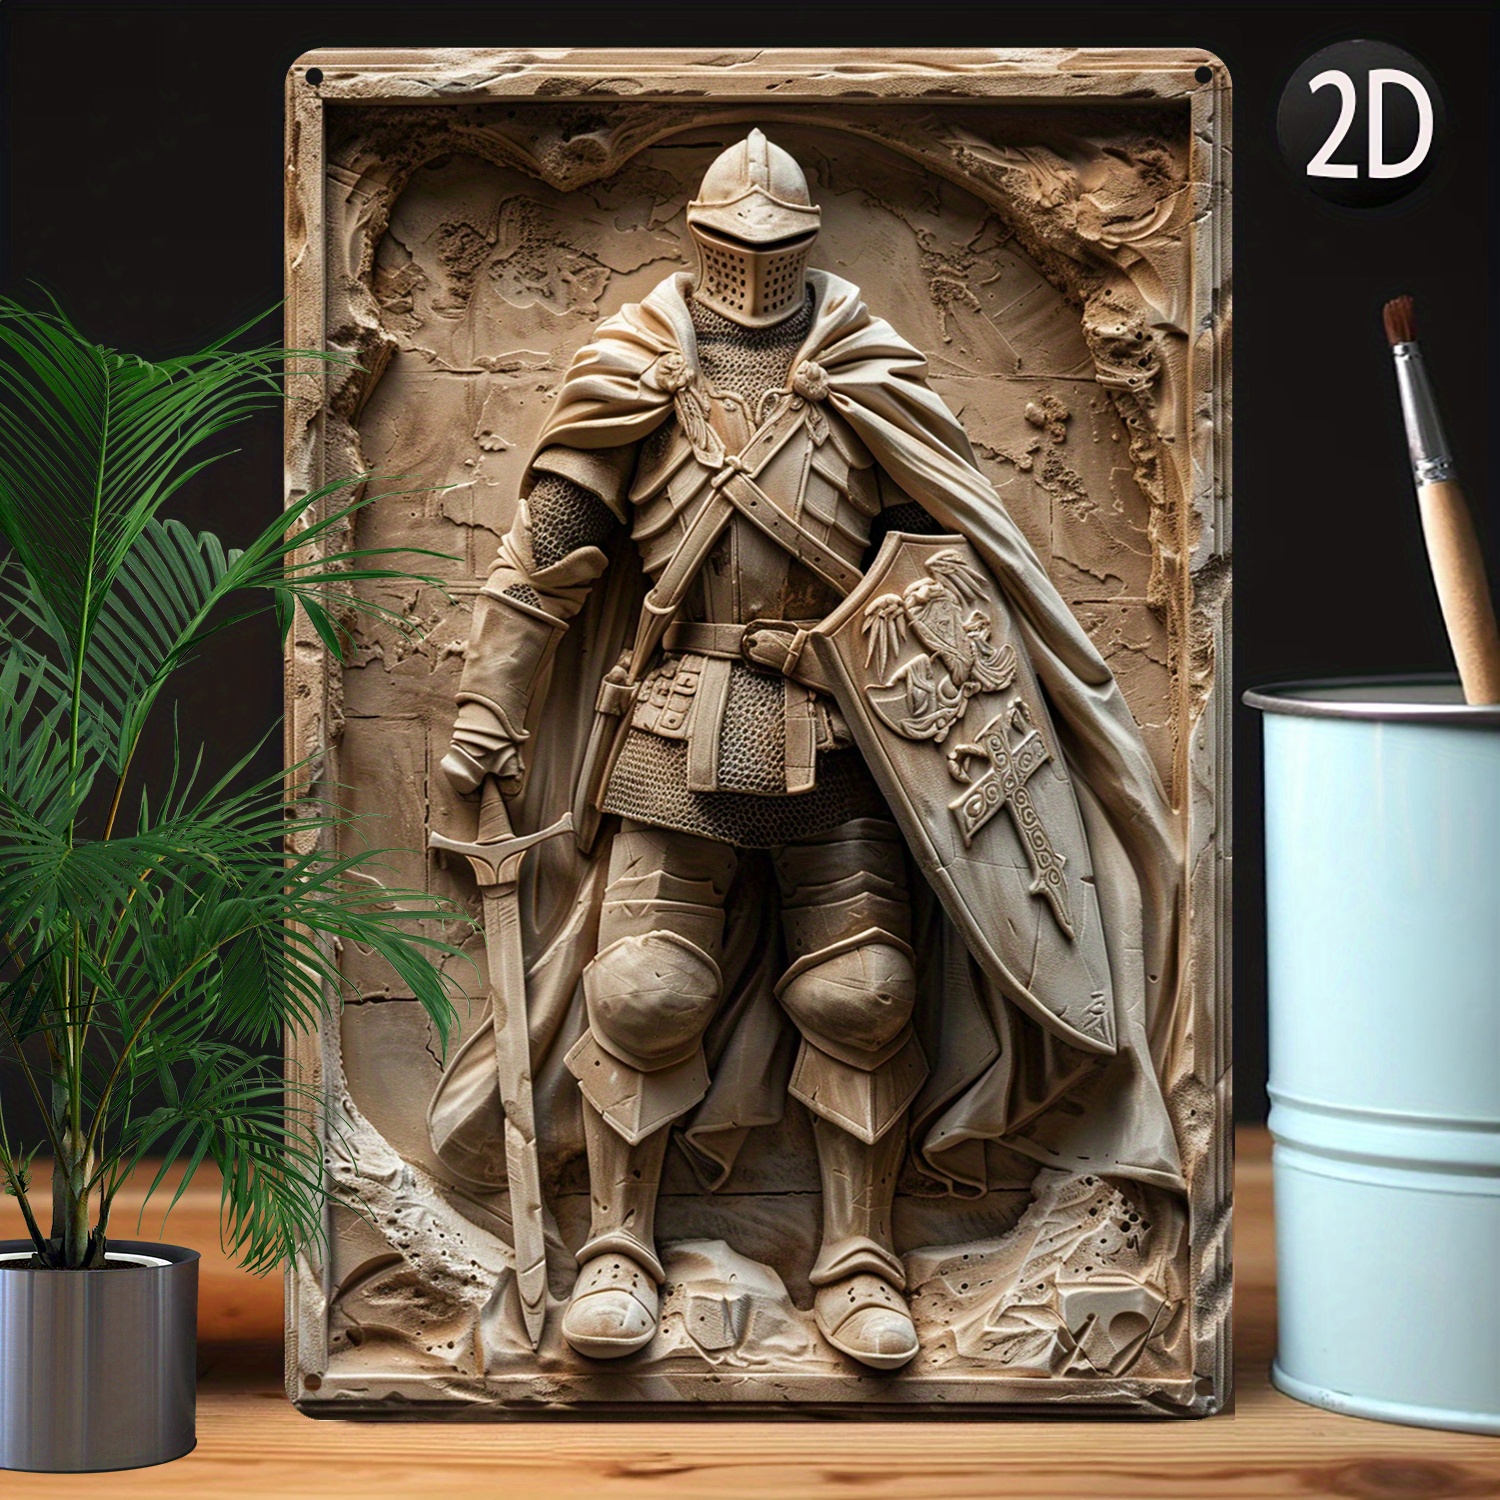 

3d Knight Design Aluminum Wall Art, 8x12 Inches - Durable Metal Tin Sign For Home Decor, Moisture Resistant & High Bend Resistance, Ideal Gift For History Enthusiasts And Medieval Theme Decoration